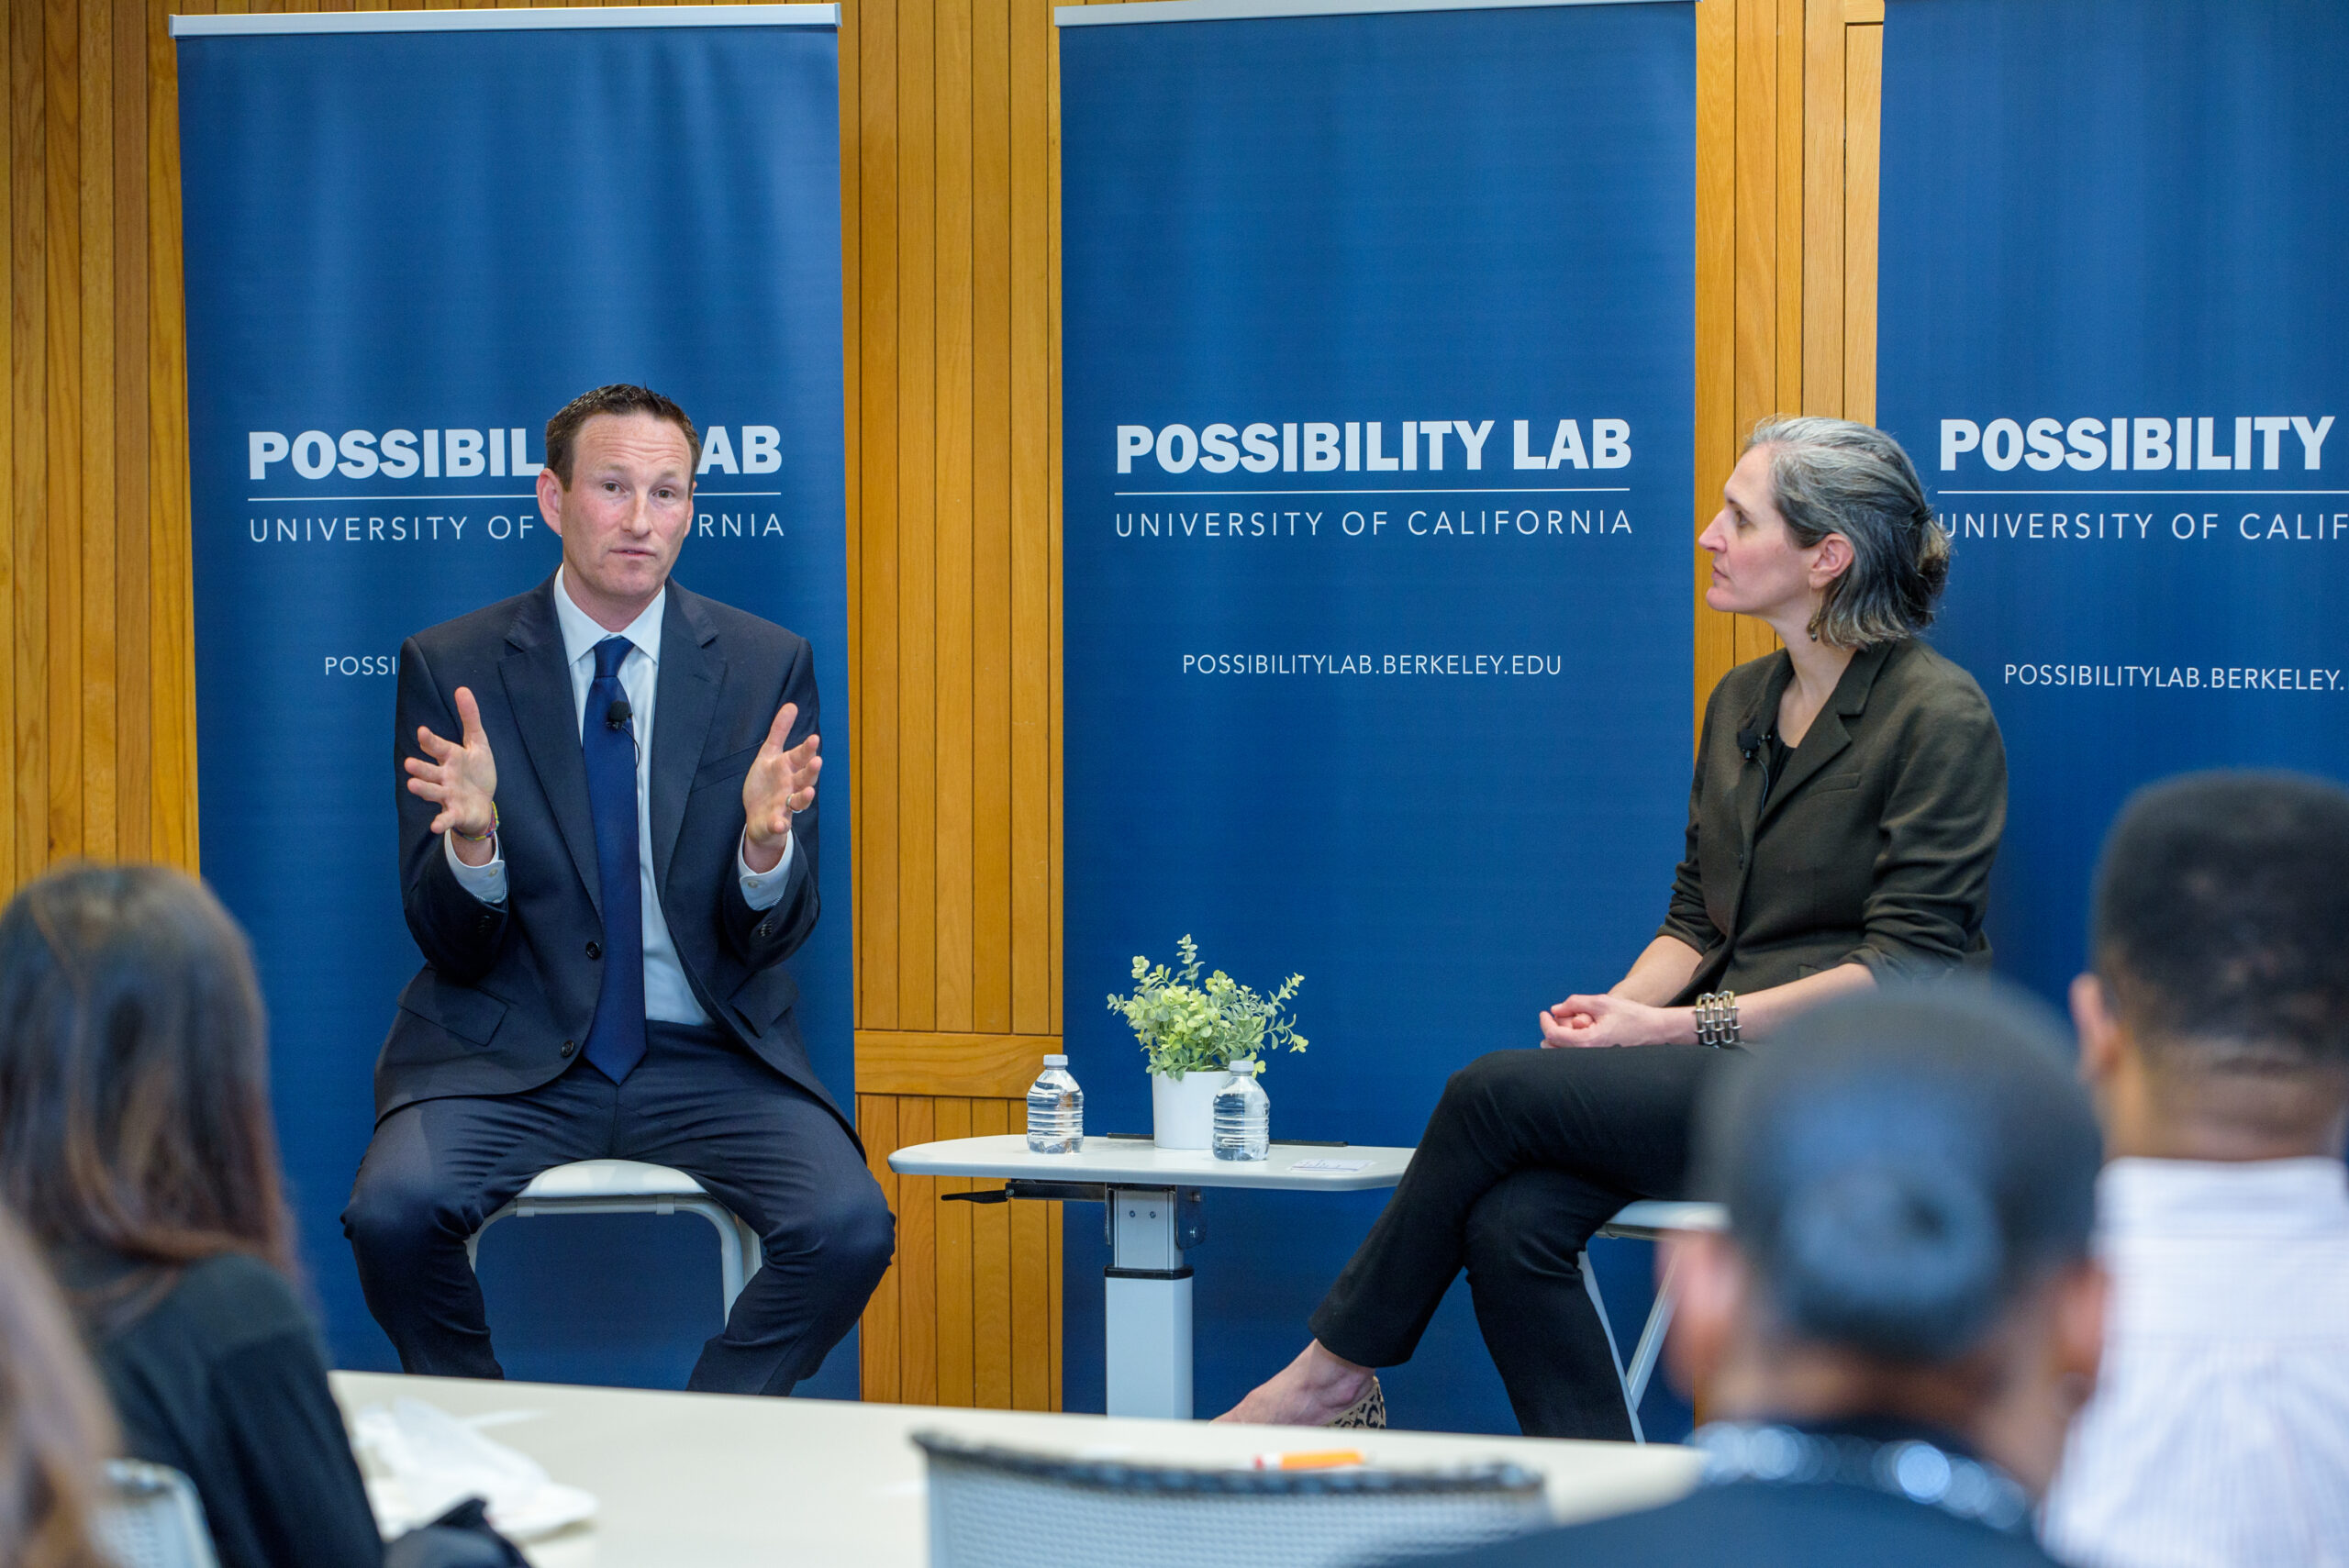 Possibility Lab Hosts first Conversations with Possibility featuring California CSO Josh Fryday